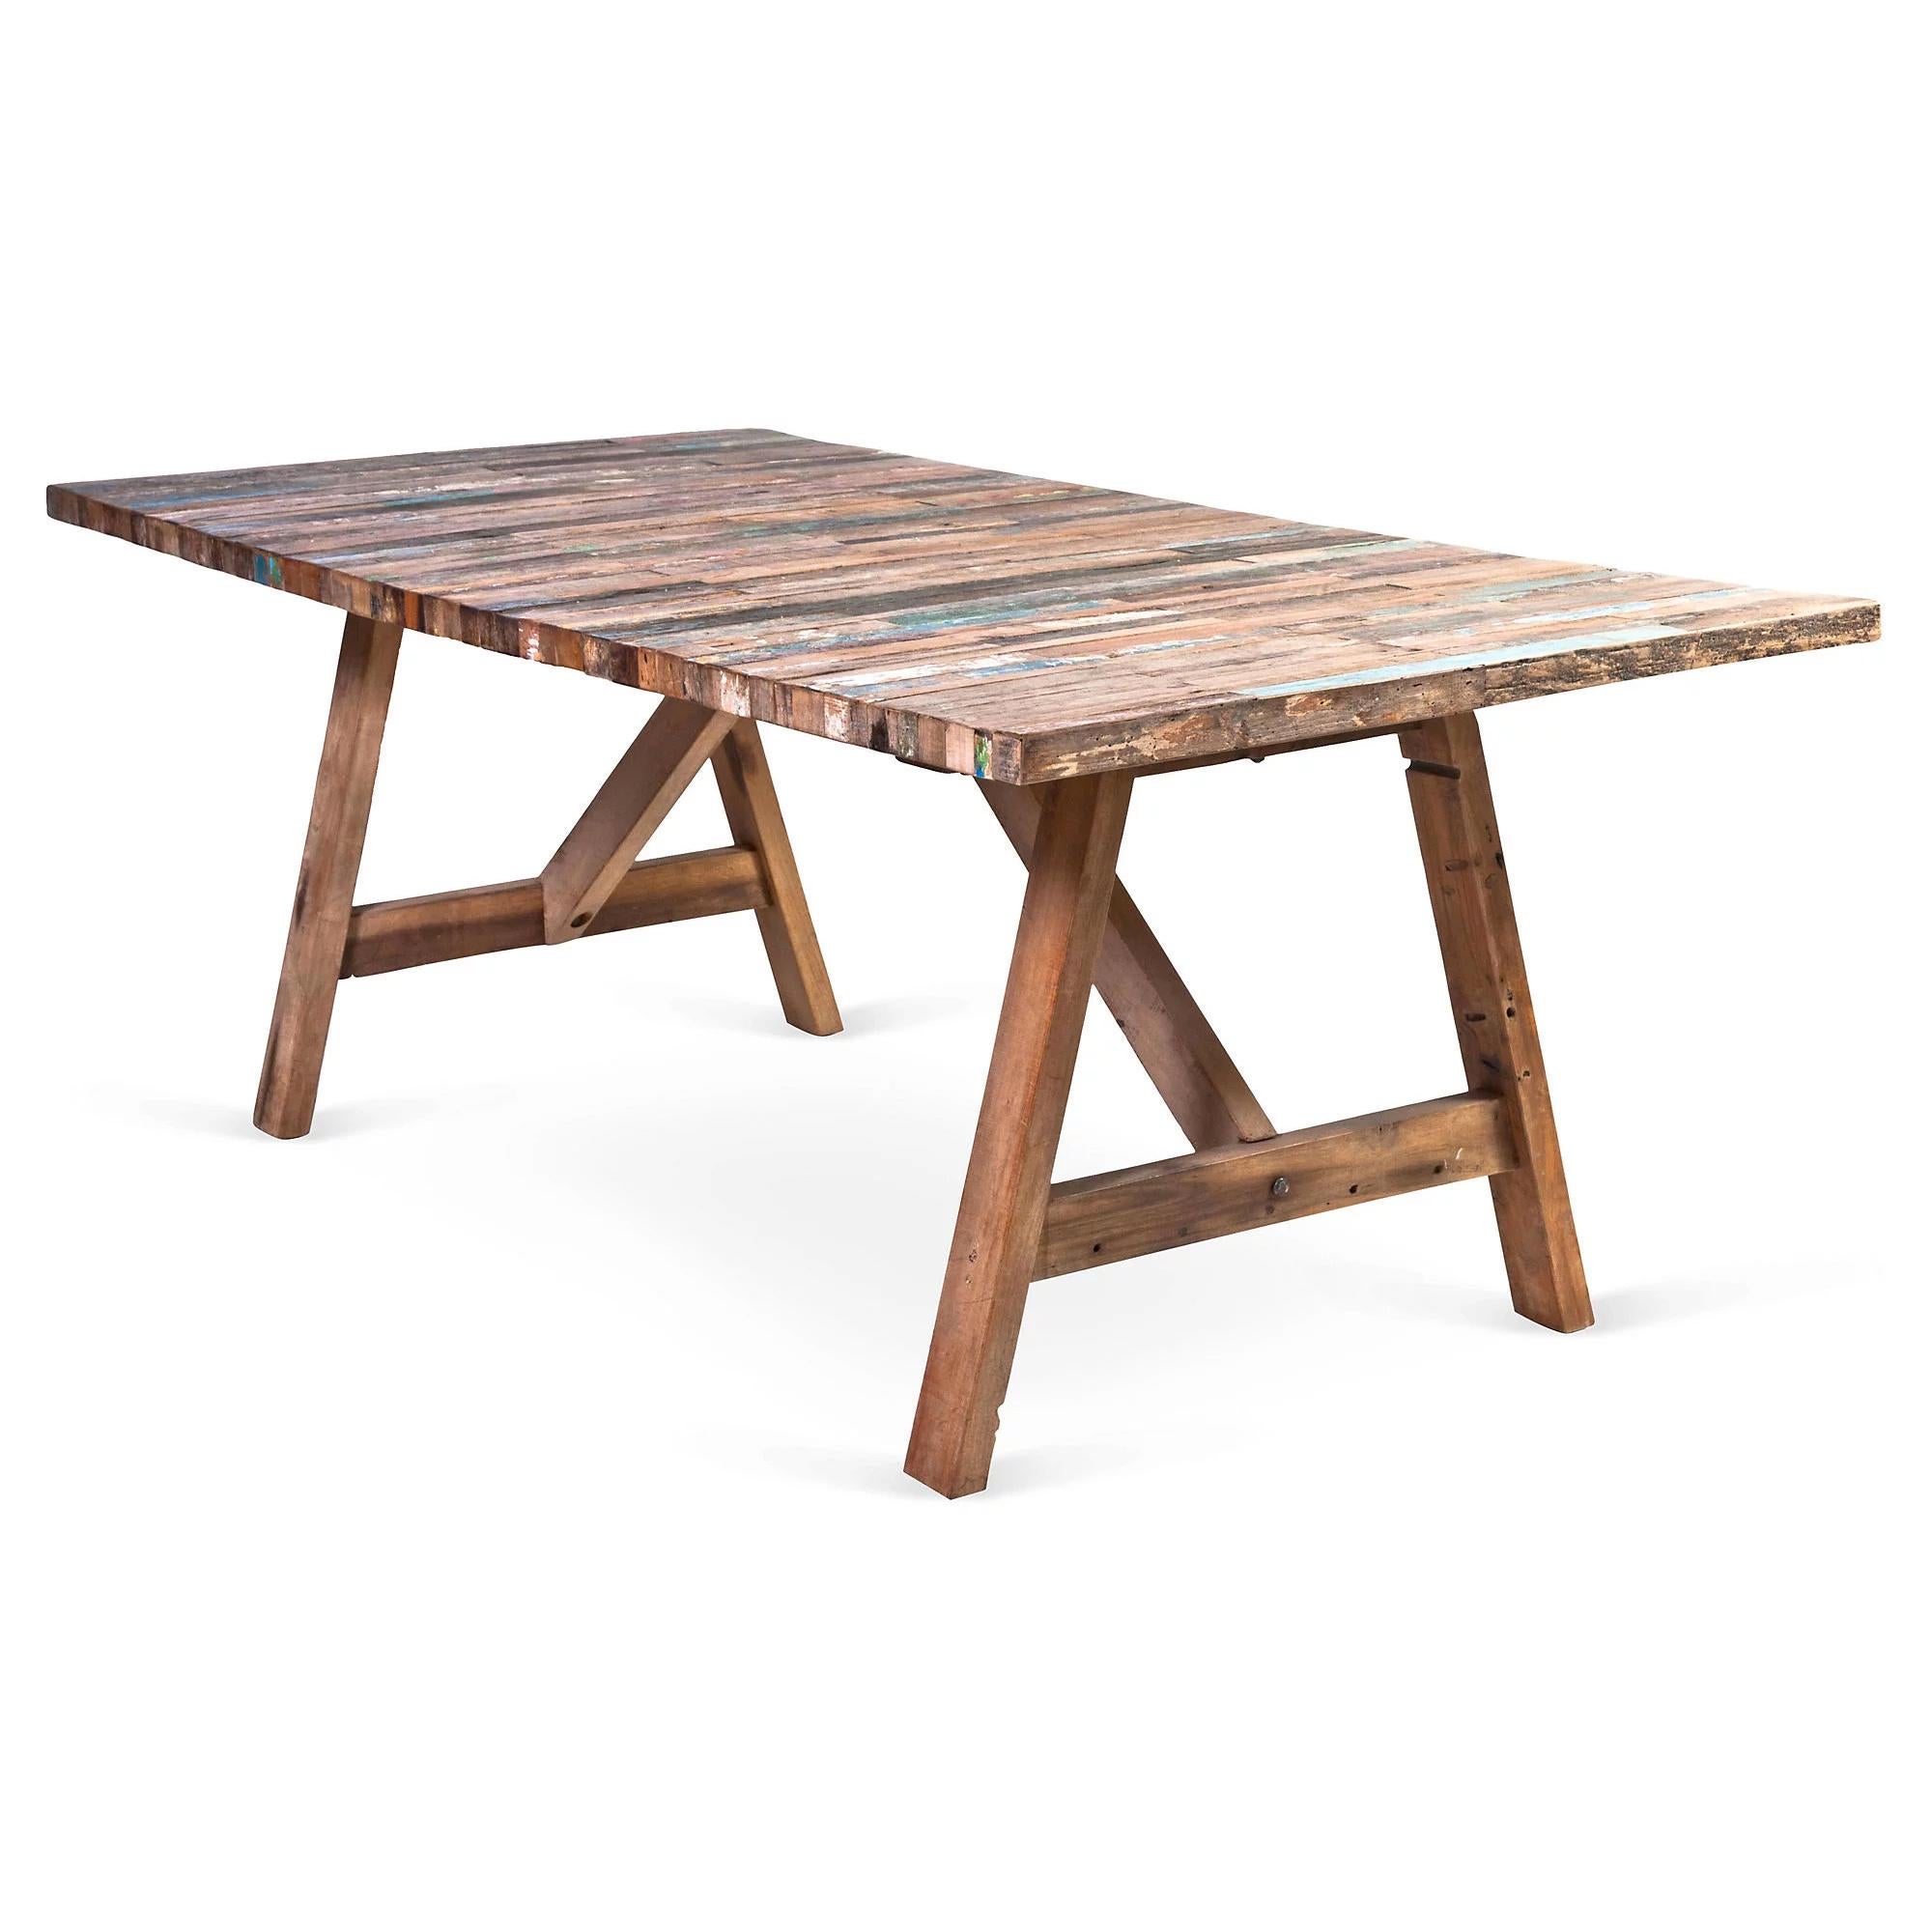 Crafted from a salvaged fishing boat in Bali, the wood in this trestle table will gain a natural patina over time; a unique piece made from wood and steel, with brown and blue coloration.